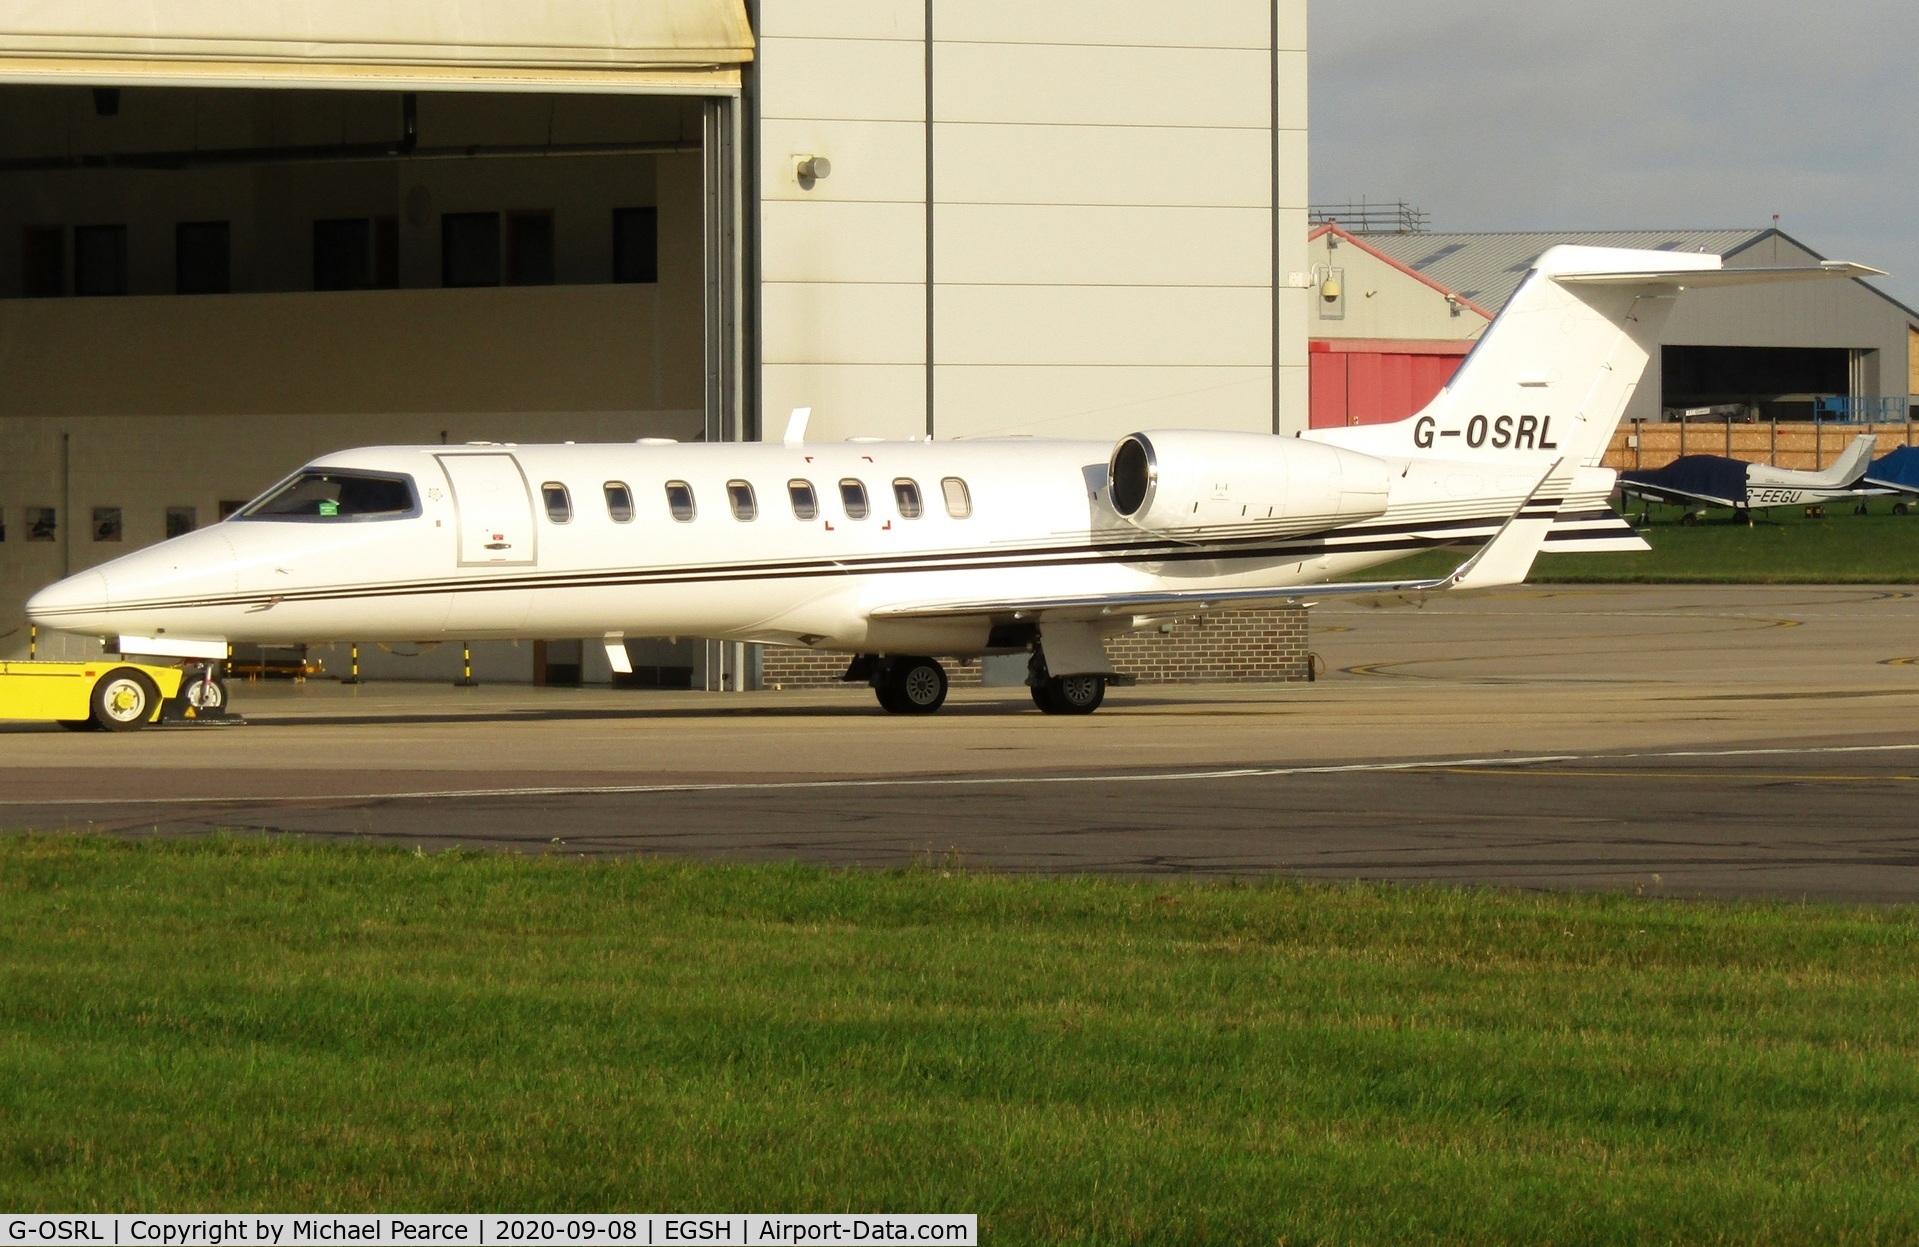 G-OSRL, 2009 Learjet 45 C/N 45-391, Under tow at SaxonAir after arrival from Bournemouth (BOH).